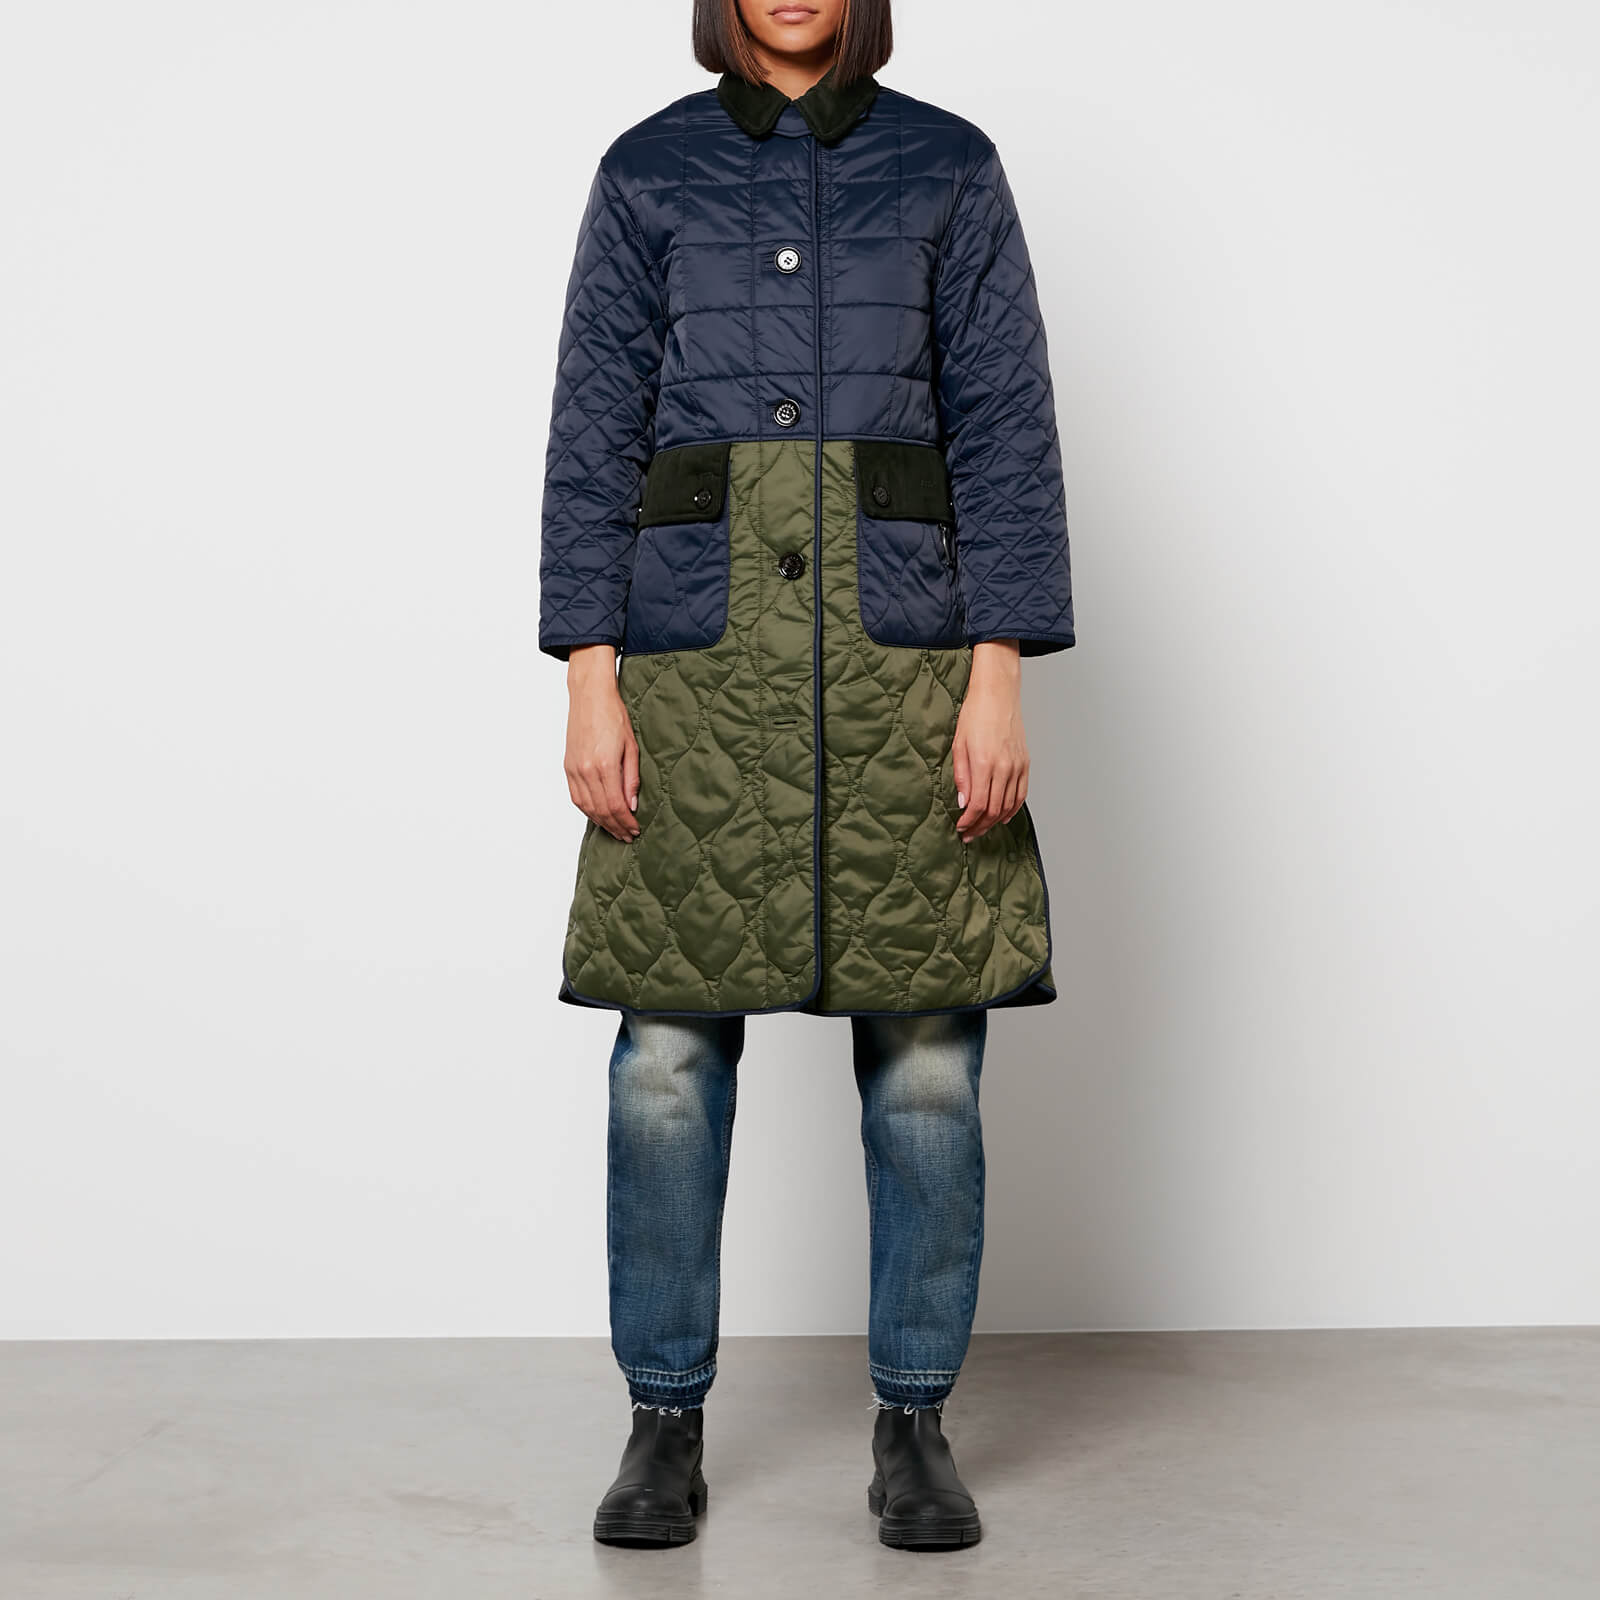 Barbour X Alexa Chung Women's Hilda Quiltted Jacket - Navy - UK 8